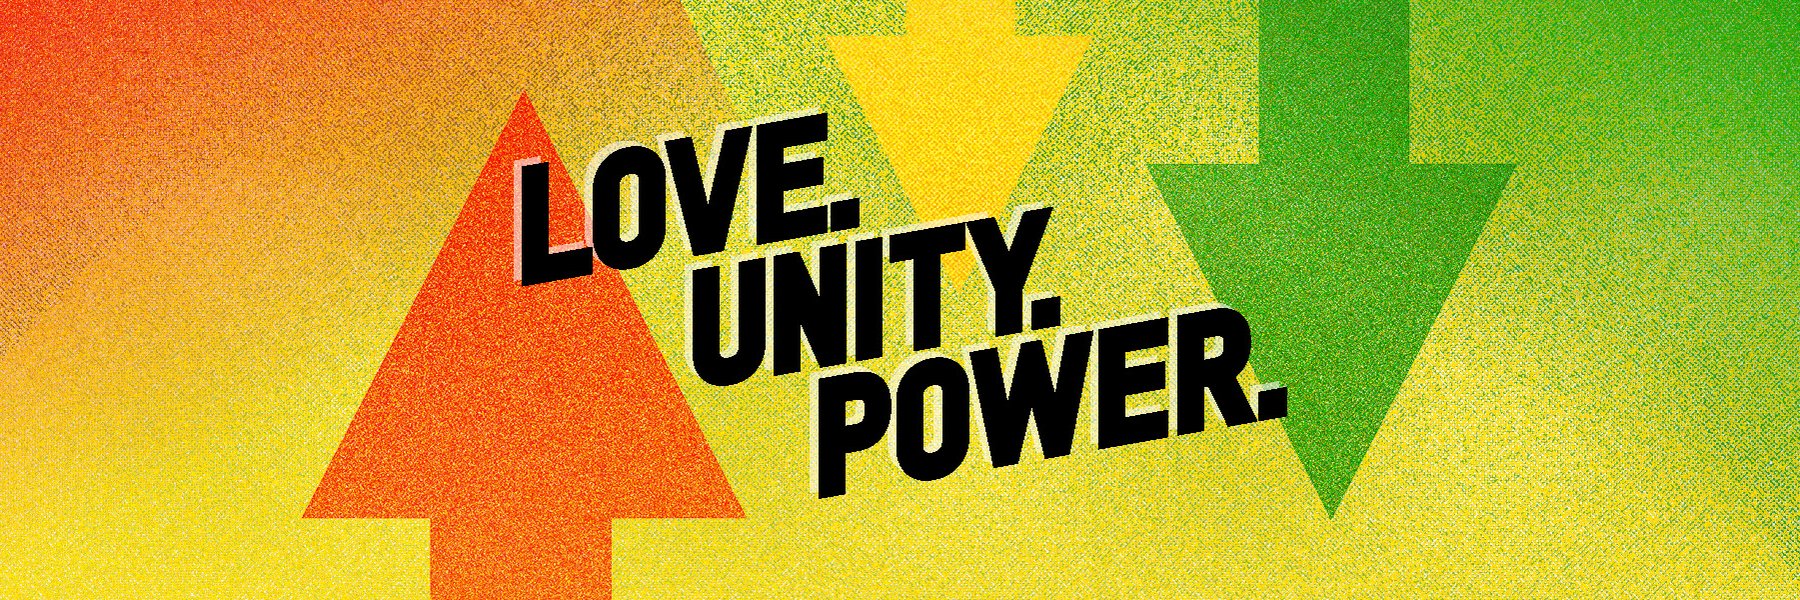 The words Love. Unity. Power overlaid on a green, yellow and red graphic with arrows